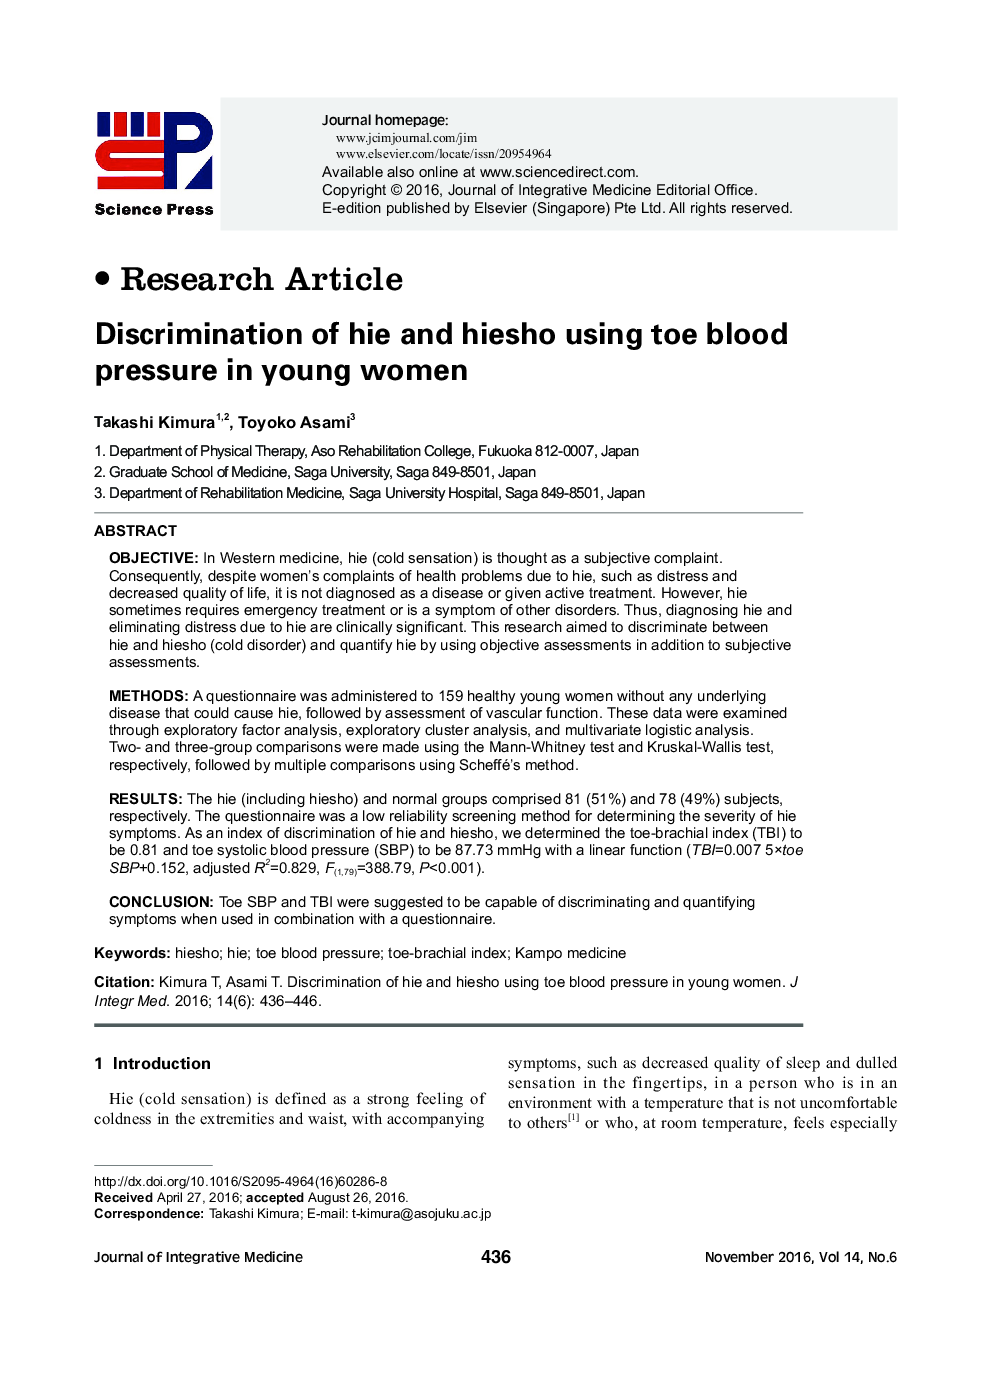 Discrimination of hie and hiesho using toe blood pressure in young women